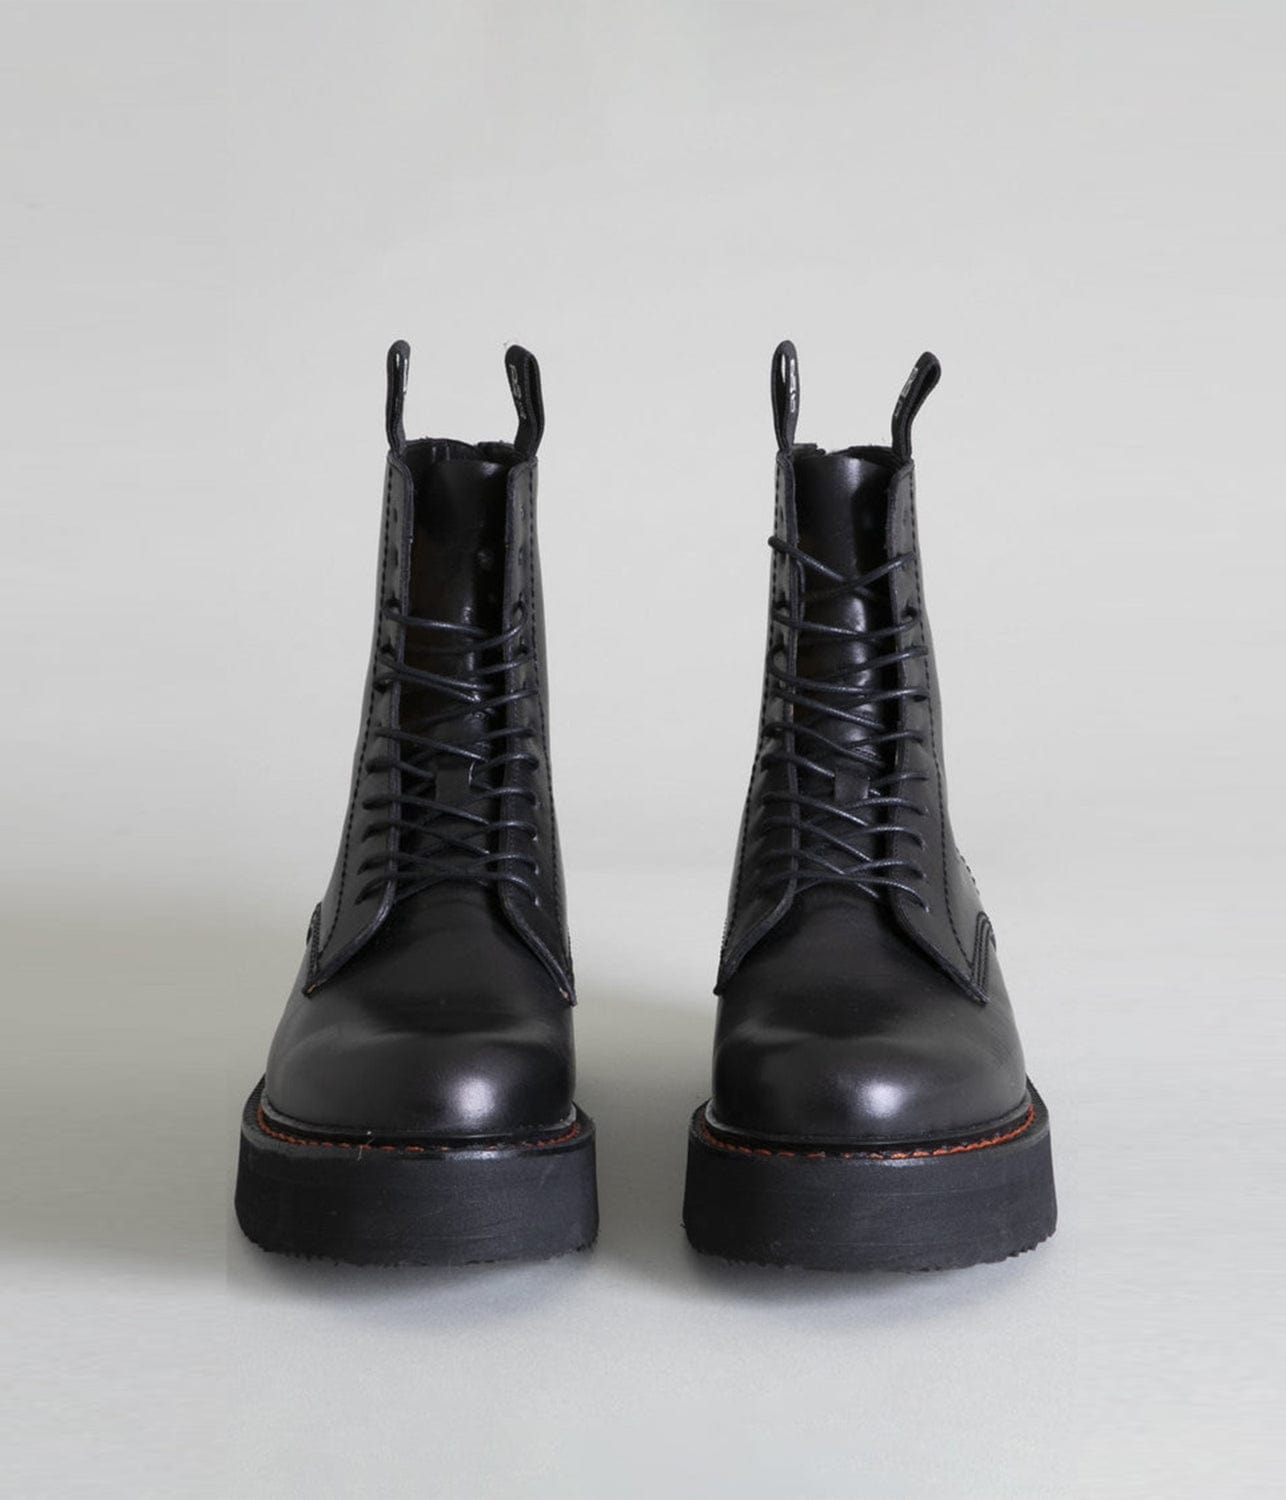 R13 R13 STACK BOOT- BLACK